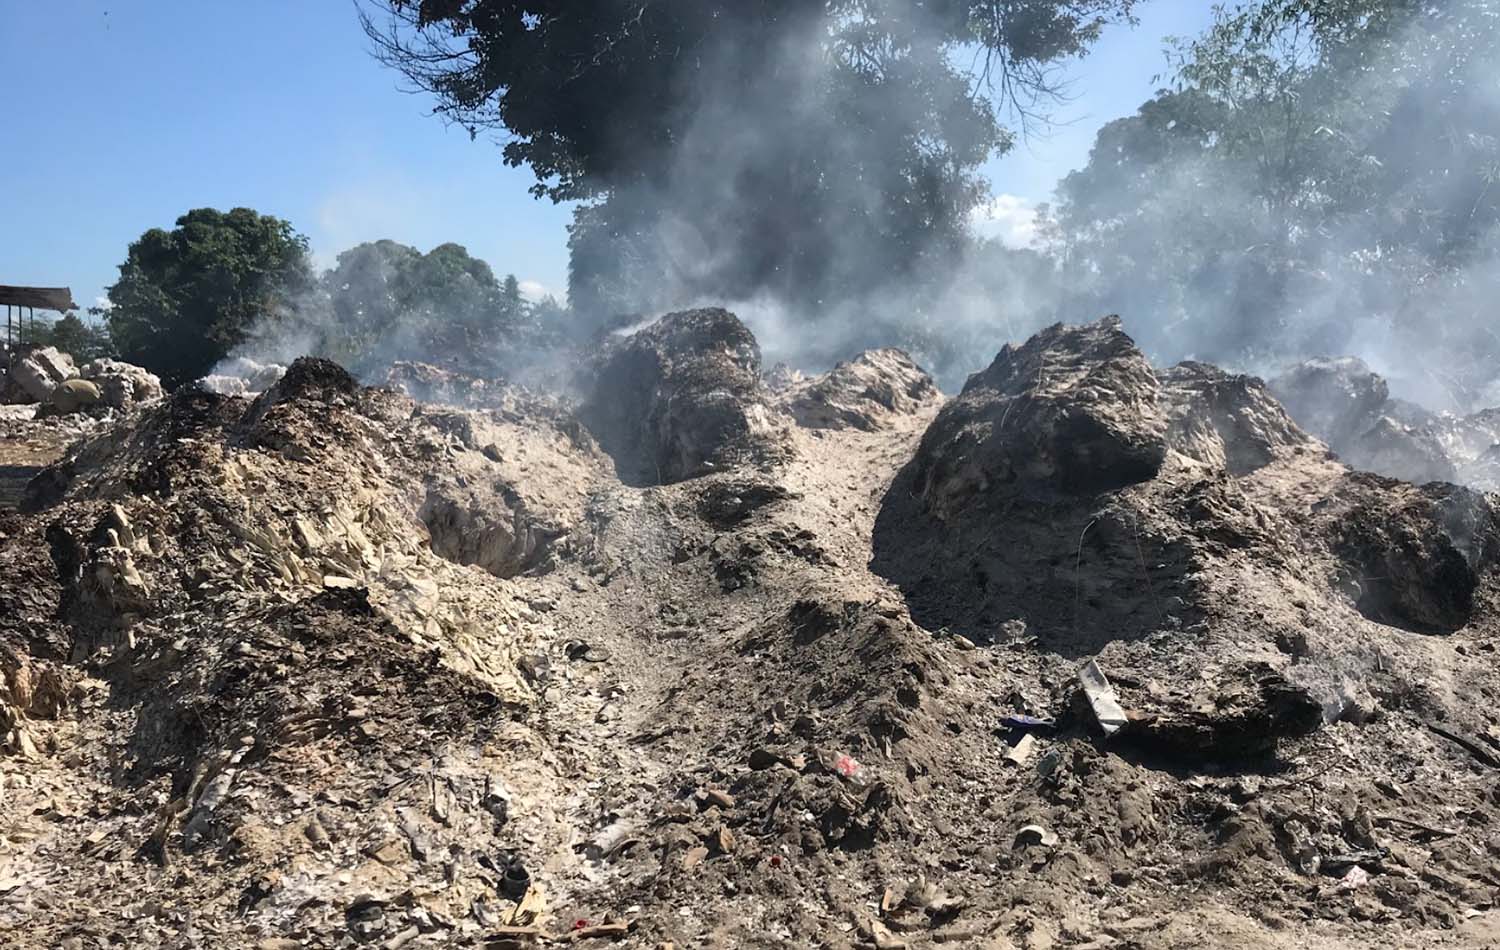 The still smoldering heap of ash after the trash piles of solid waste from the Park caught on fire in 2020.